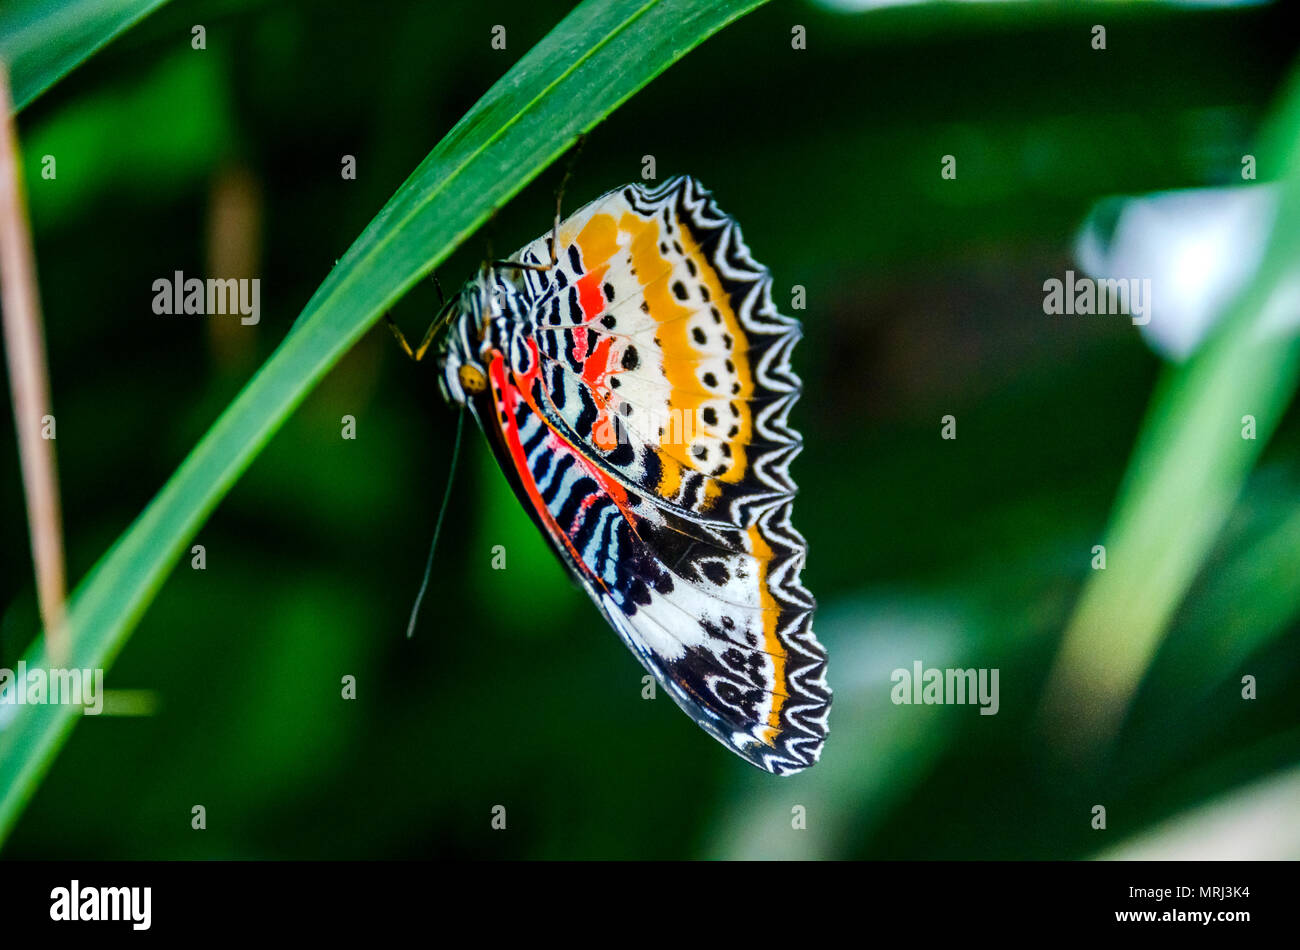 LONDON, UK - APRIL 4, 2018: A colorful butterfly with its wings folded in green background at the exhibition features at Natural History Museum. Stock Photo